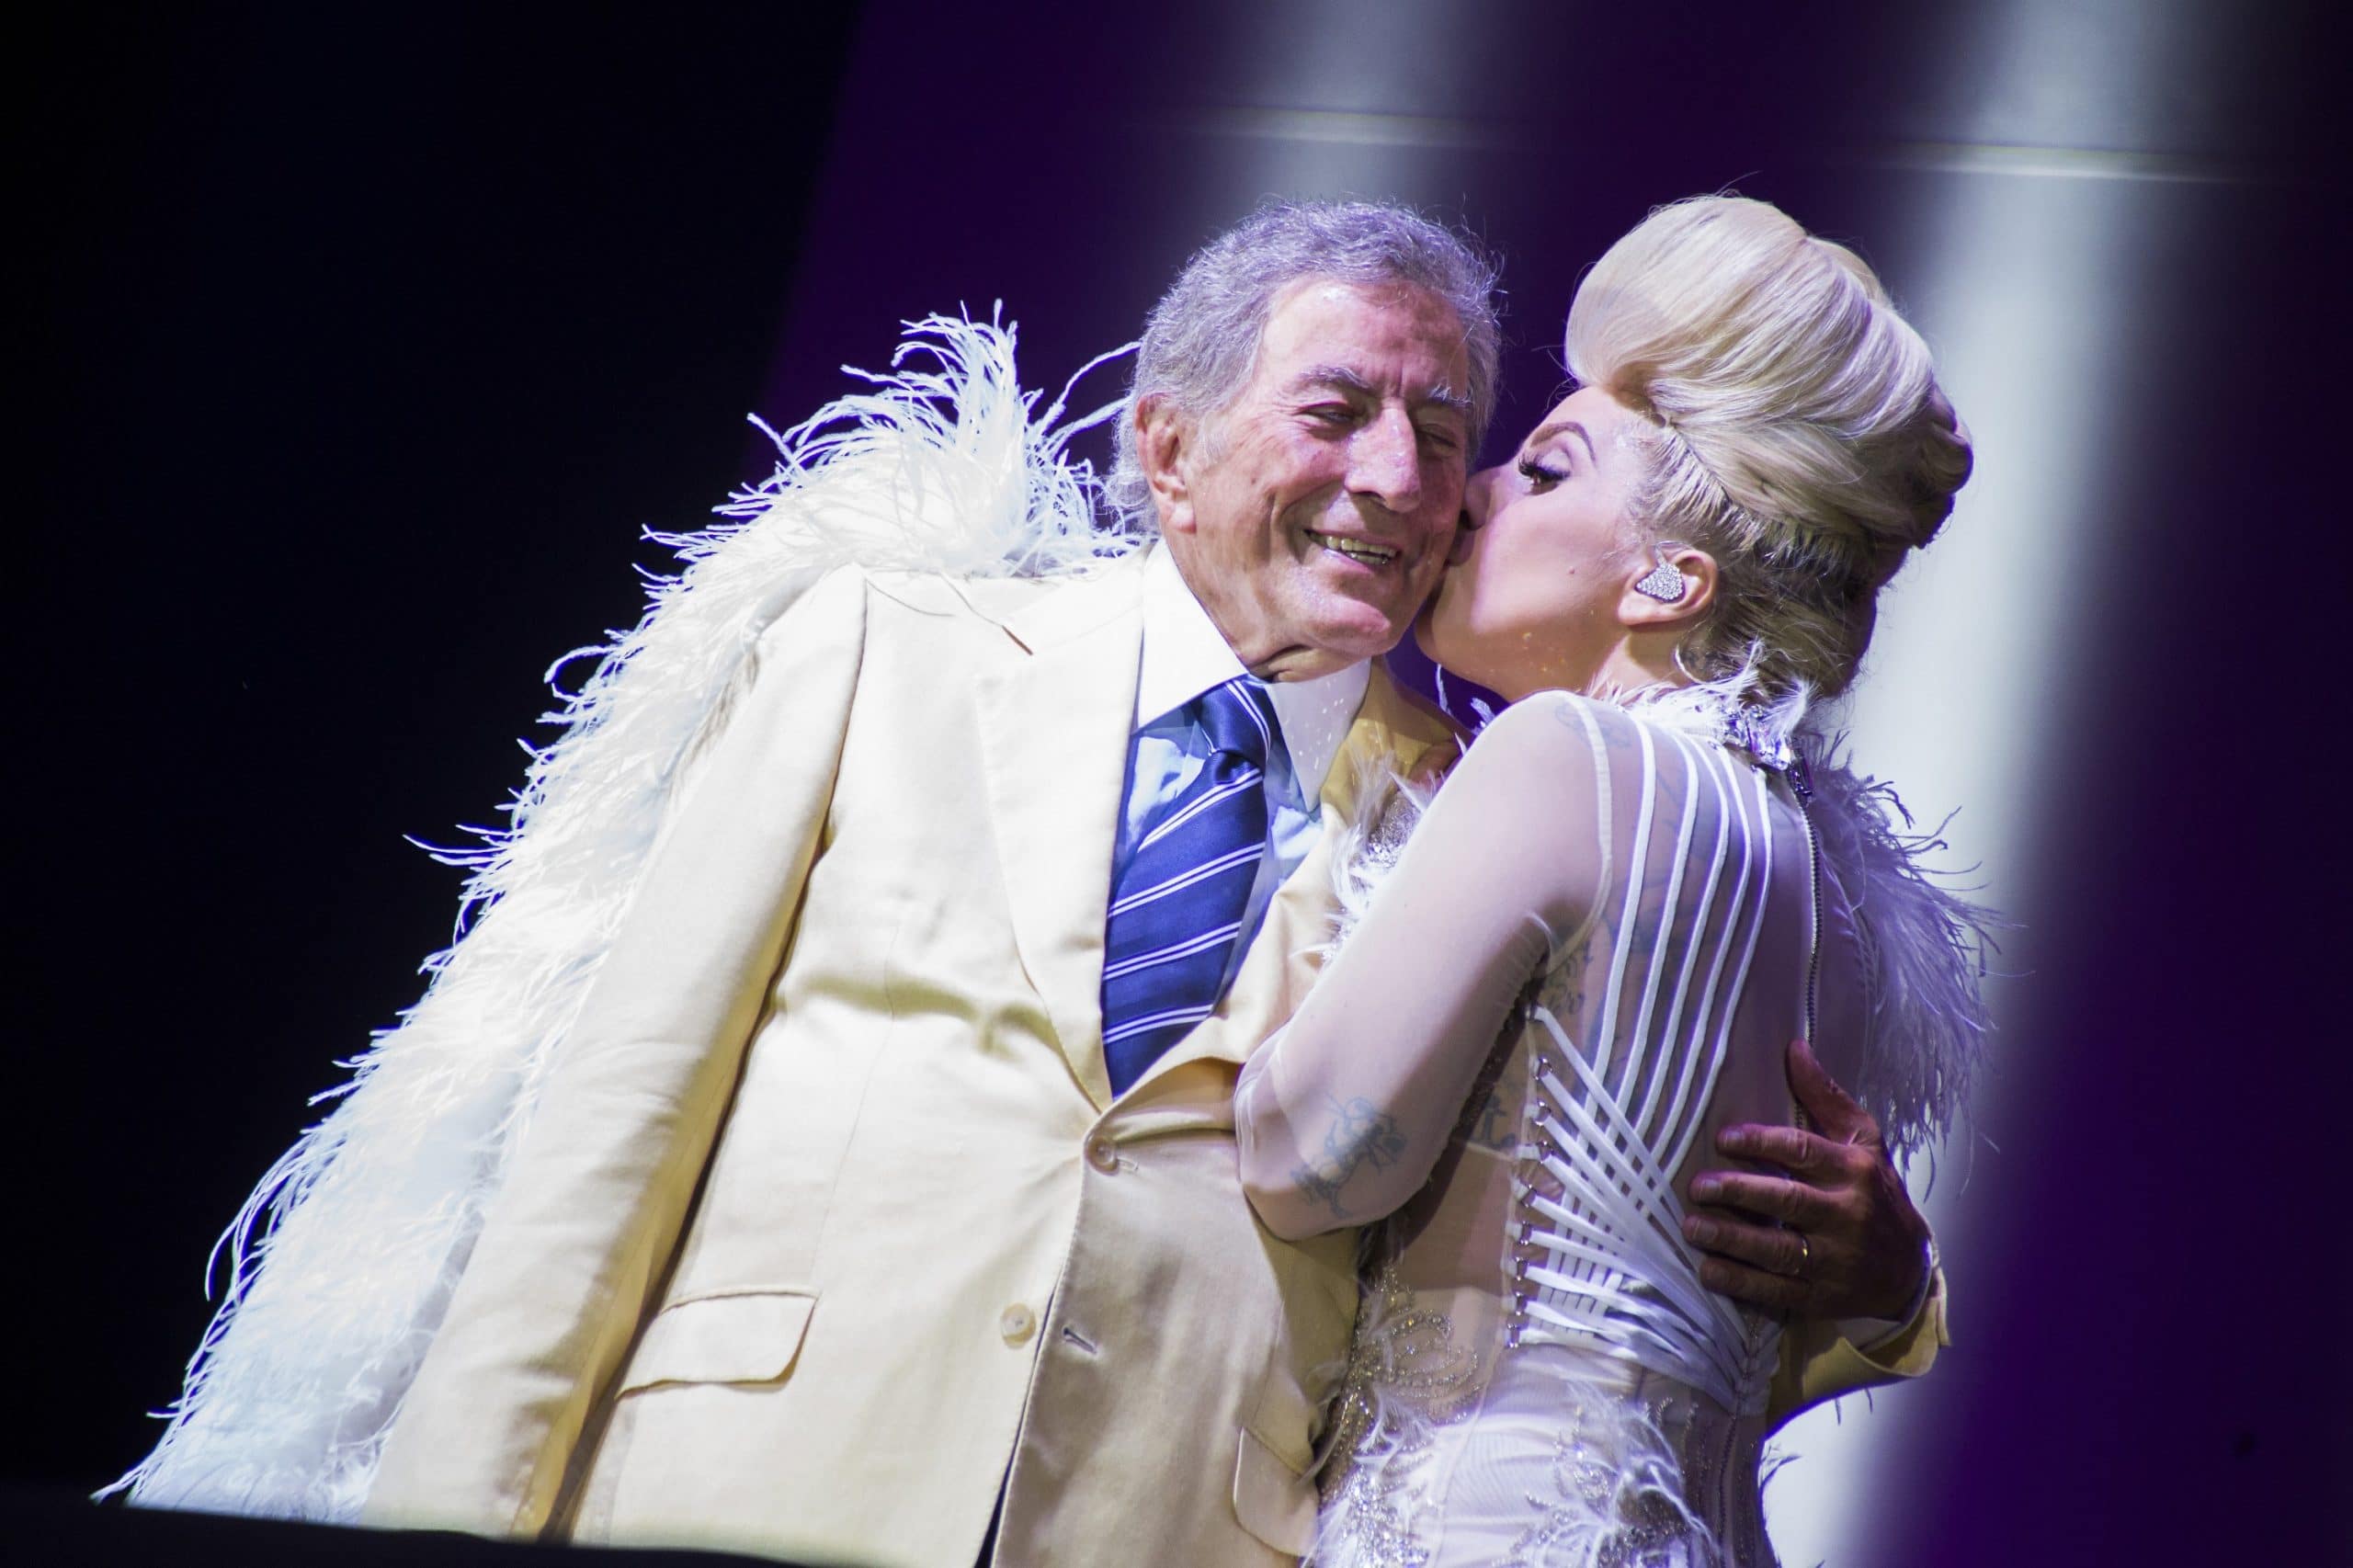 The singer-songwriter and actress Lady Gaga (Stefani Joanne Angelina Germanotta) and the singer Tony Bennett (Anthony Dominick Benedetto)